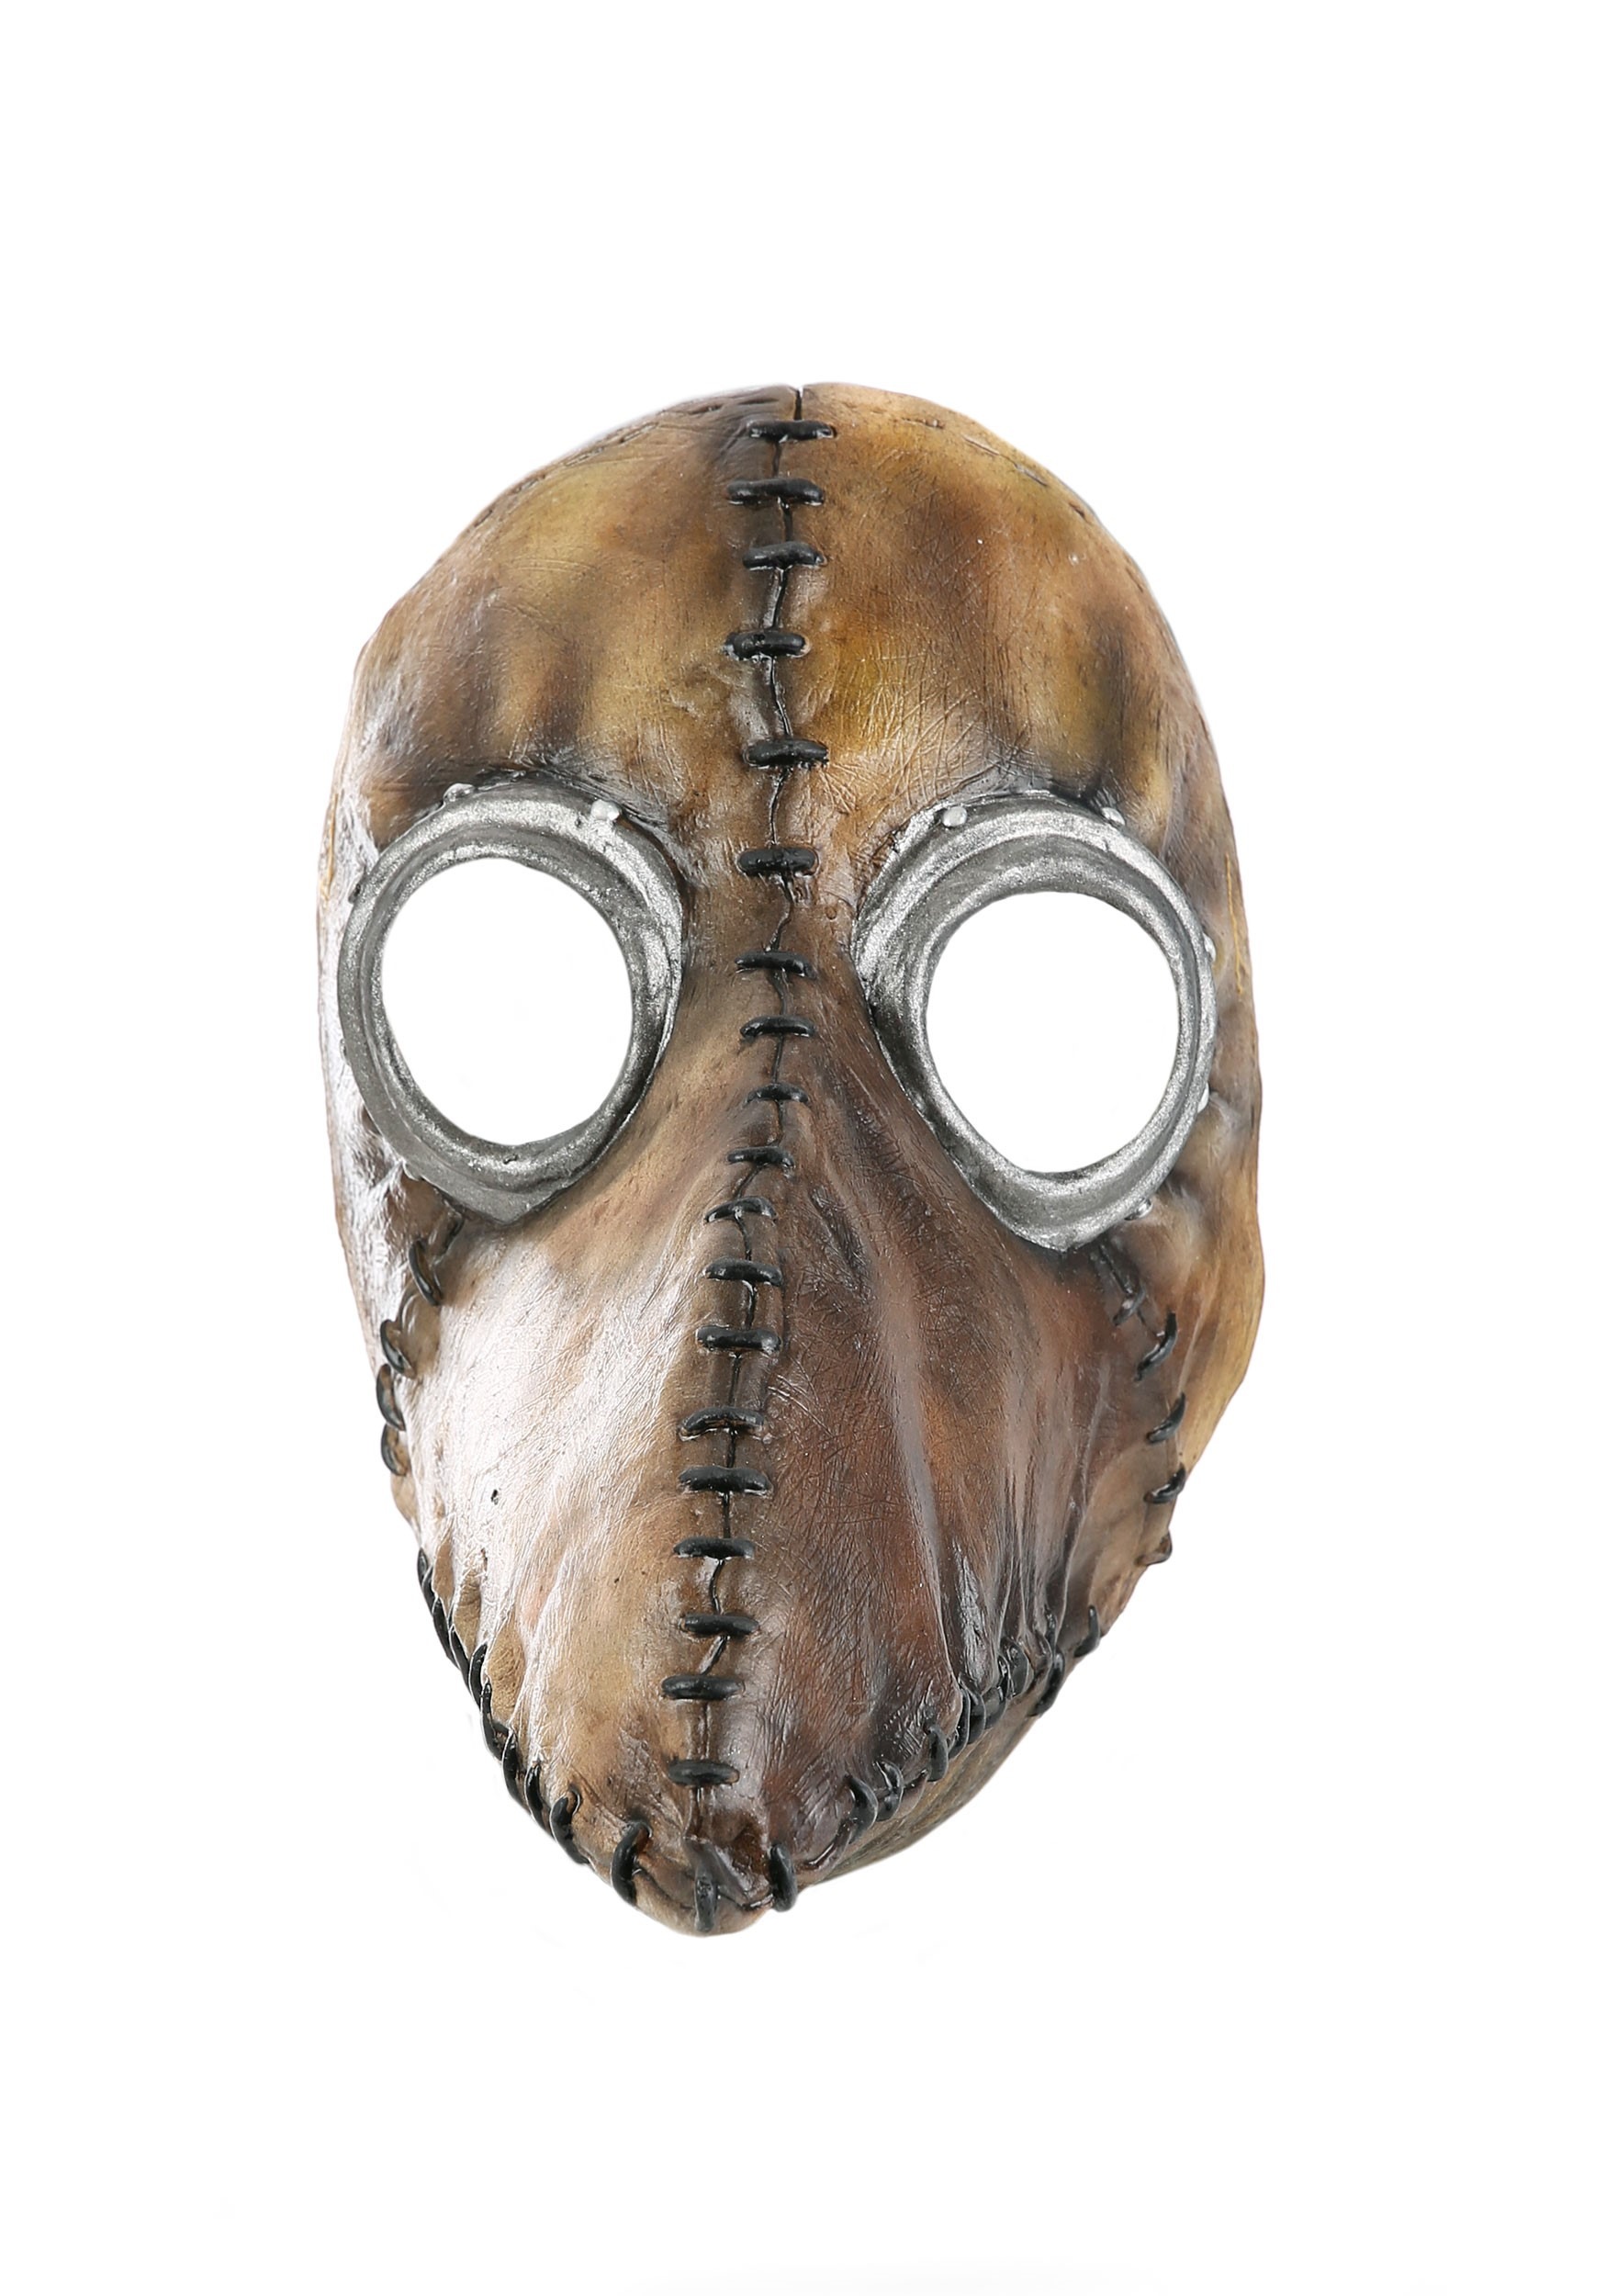 Plague Doctor Brown Mask